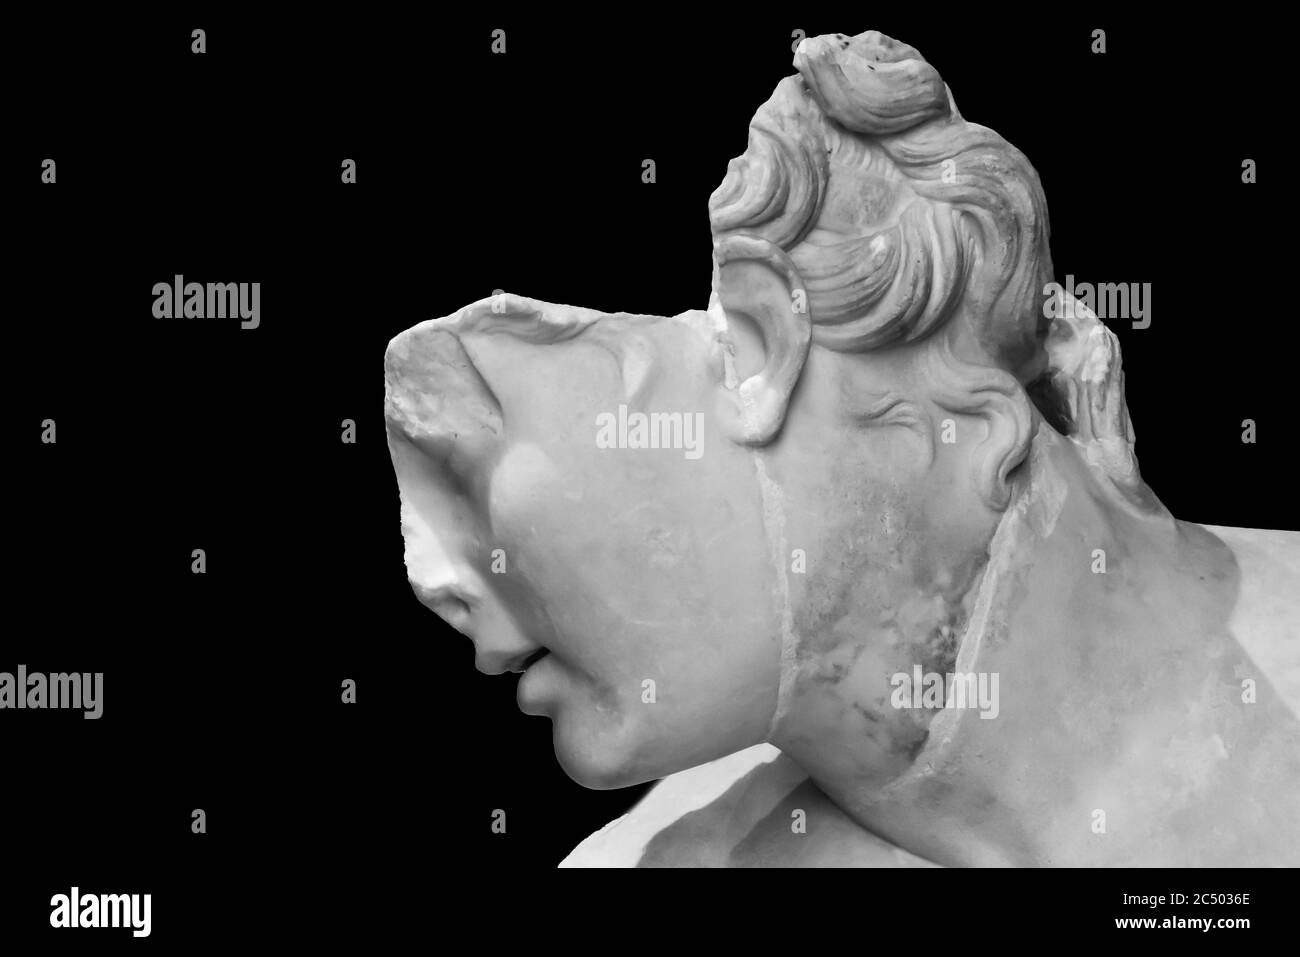 Black and white photo on close-up of profile of broken head of ancient roman statue in ruins Stock Photo